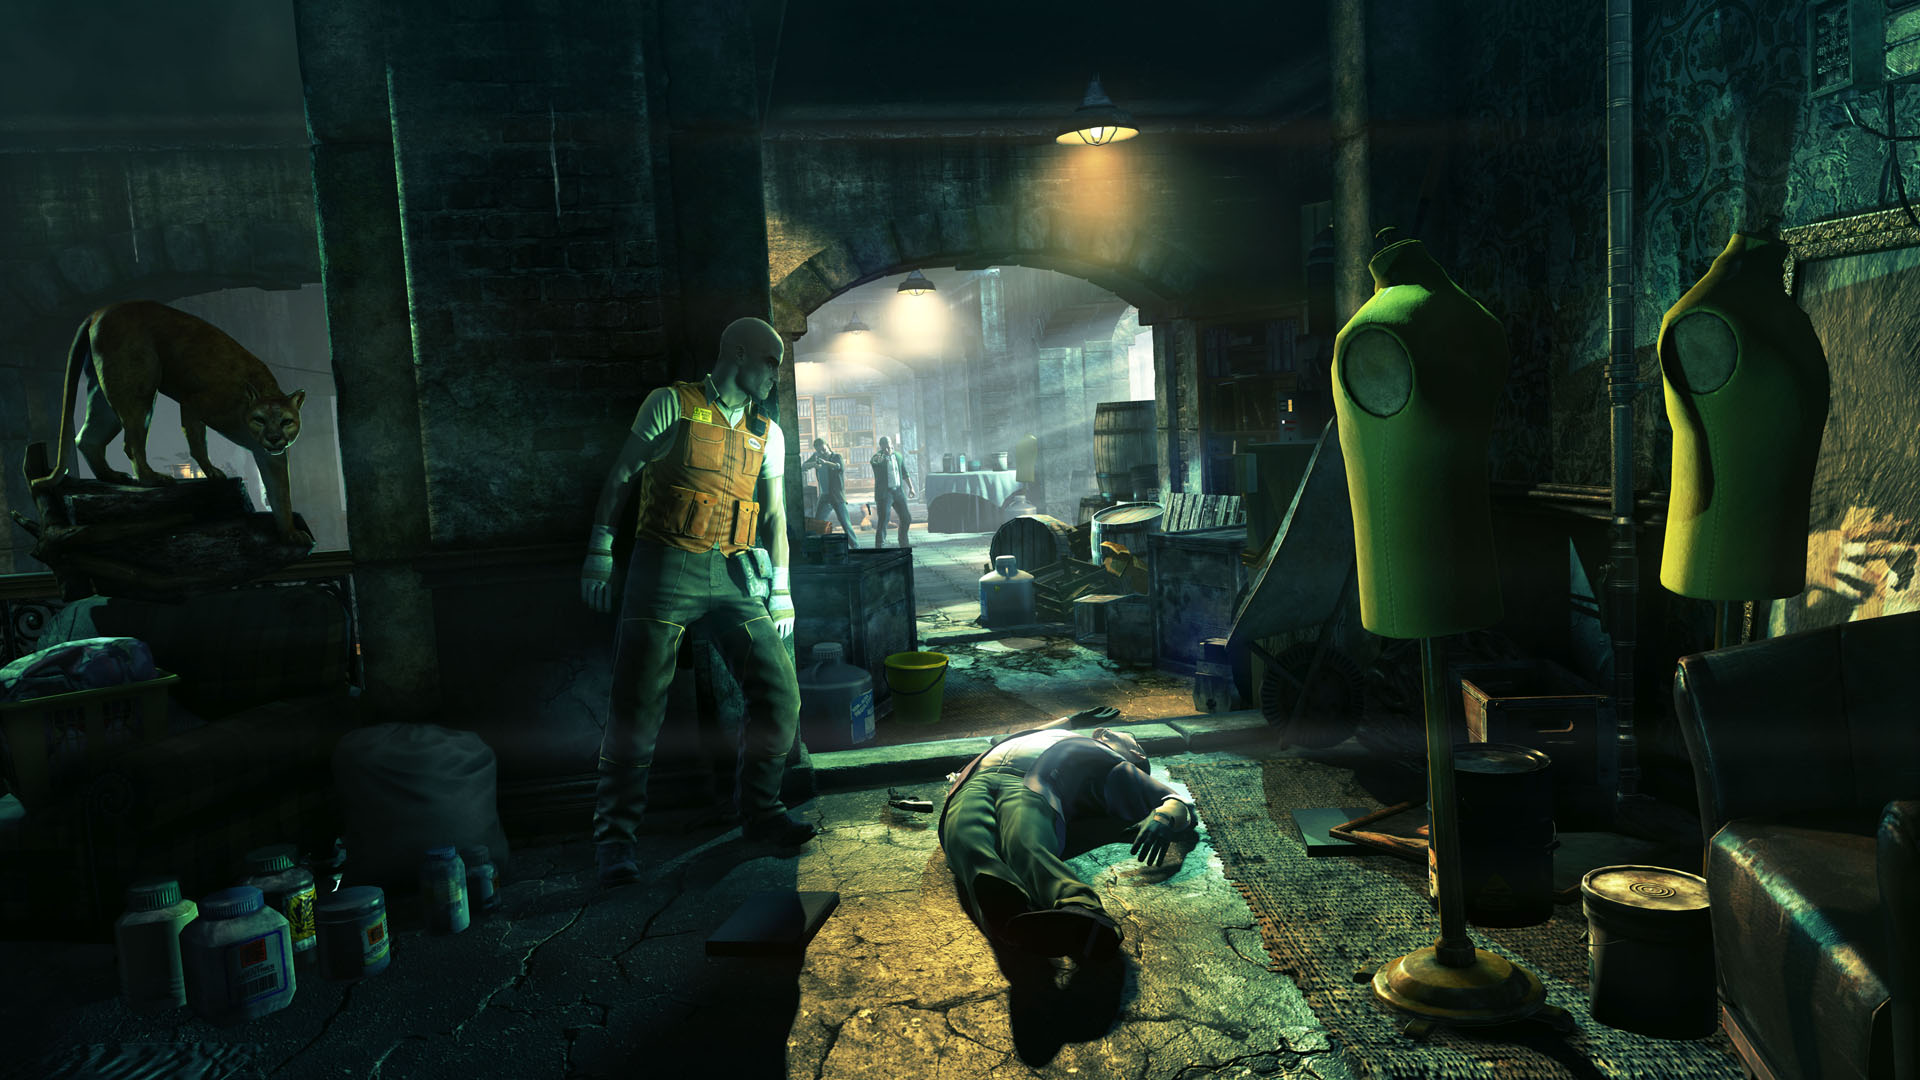 Hitman: Absolution Screenshots Inspects Sewers, Goes Clubbing1920 x 1080